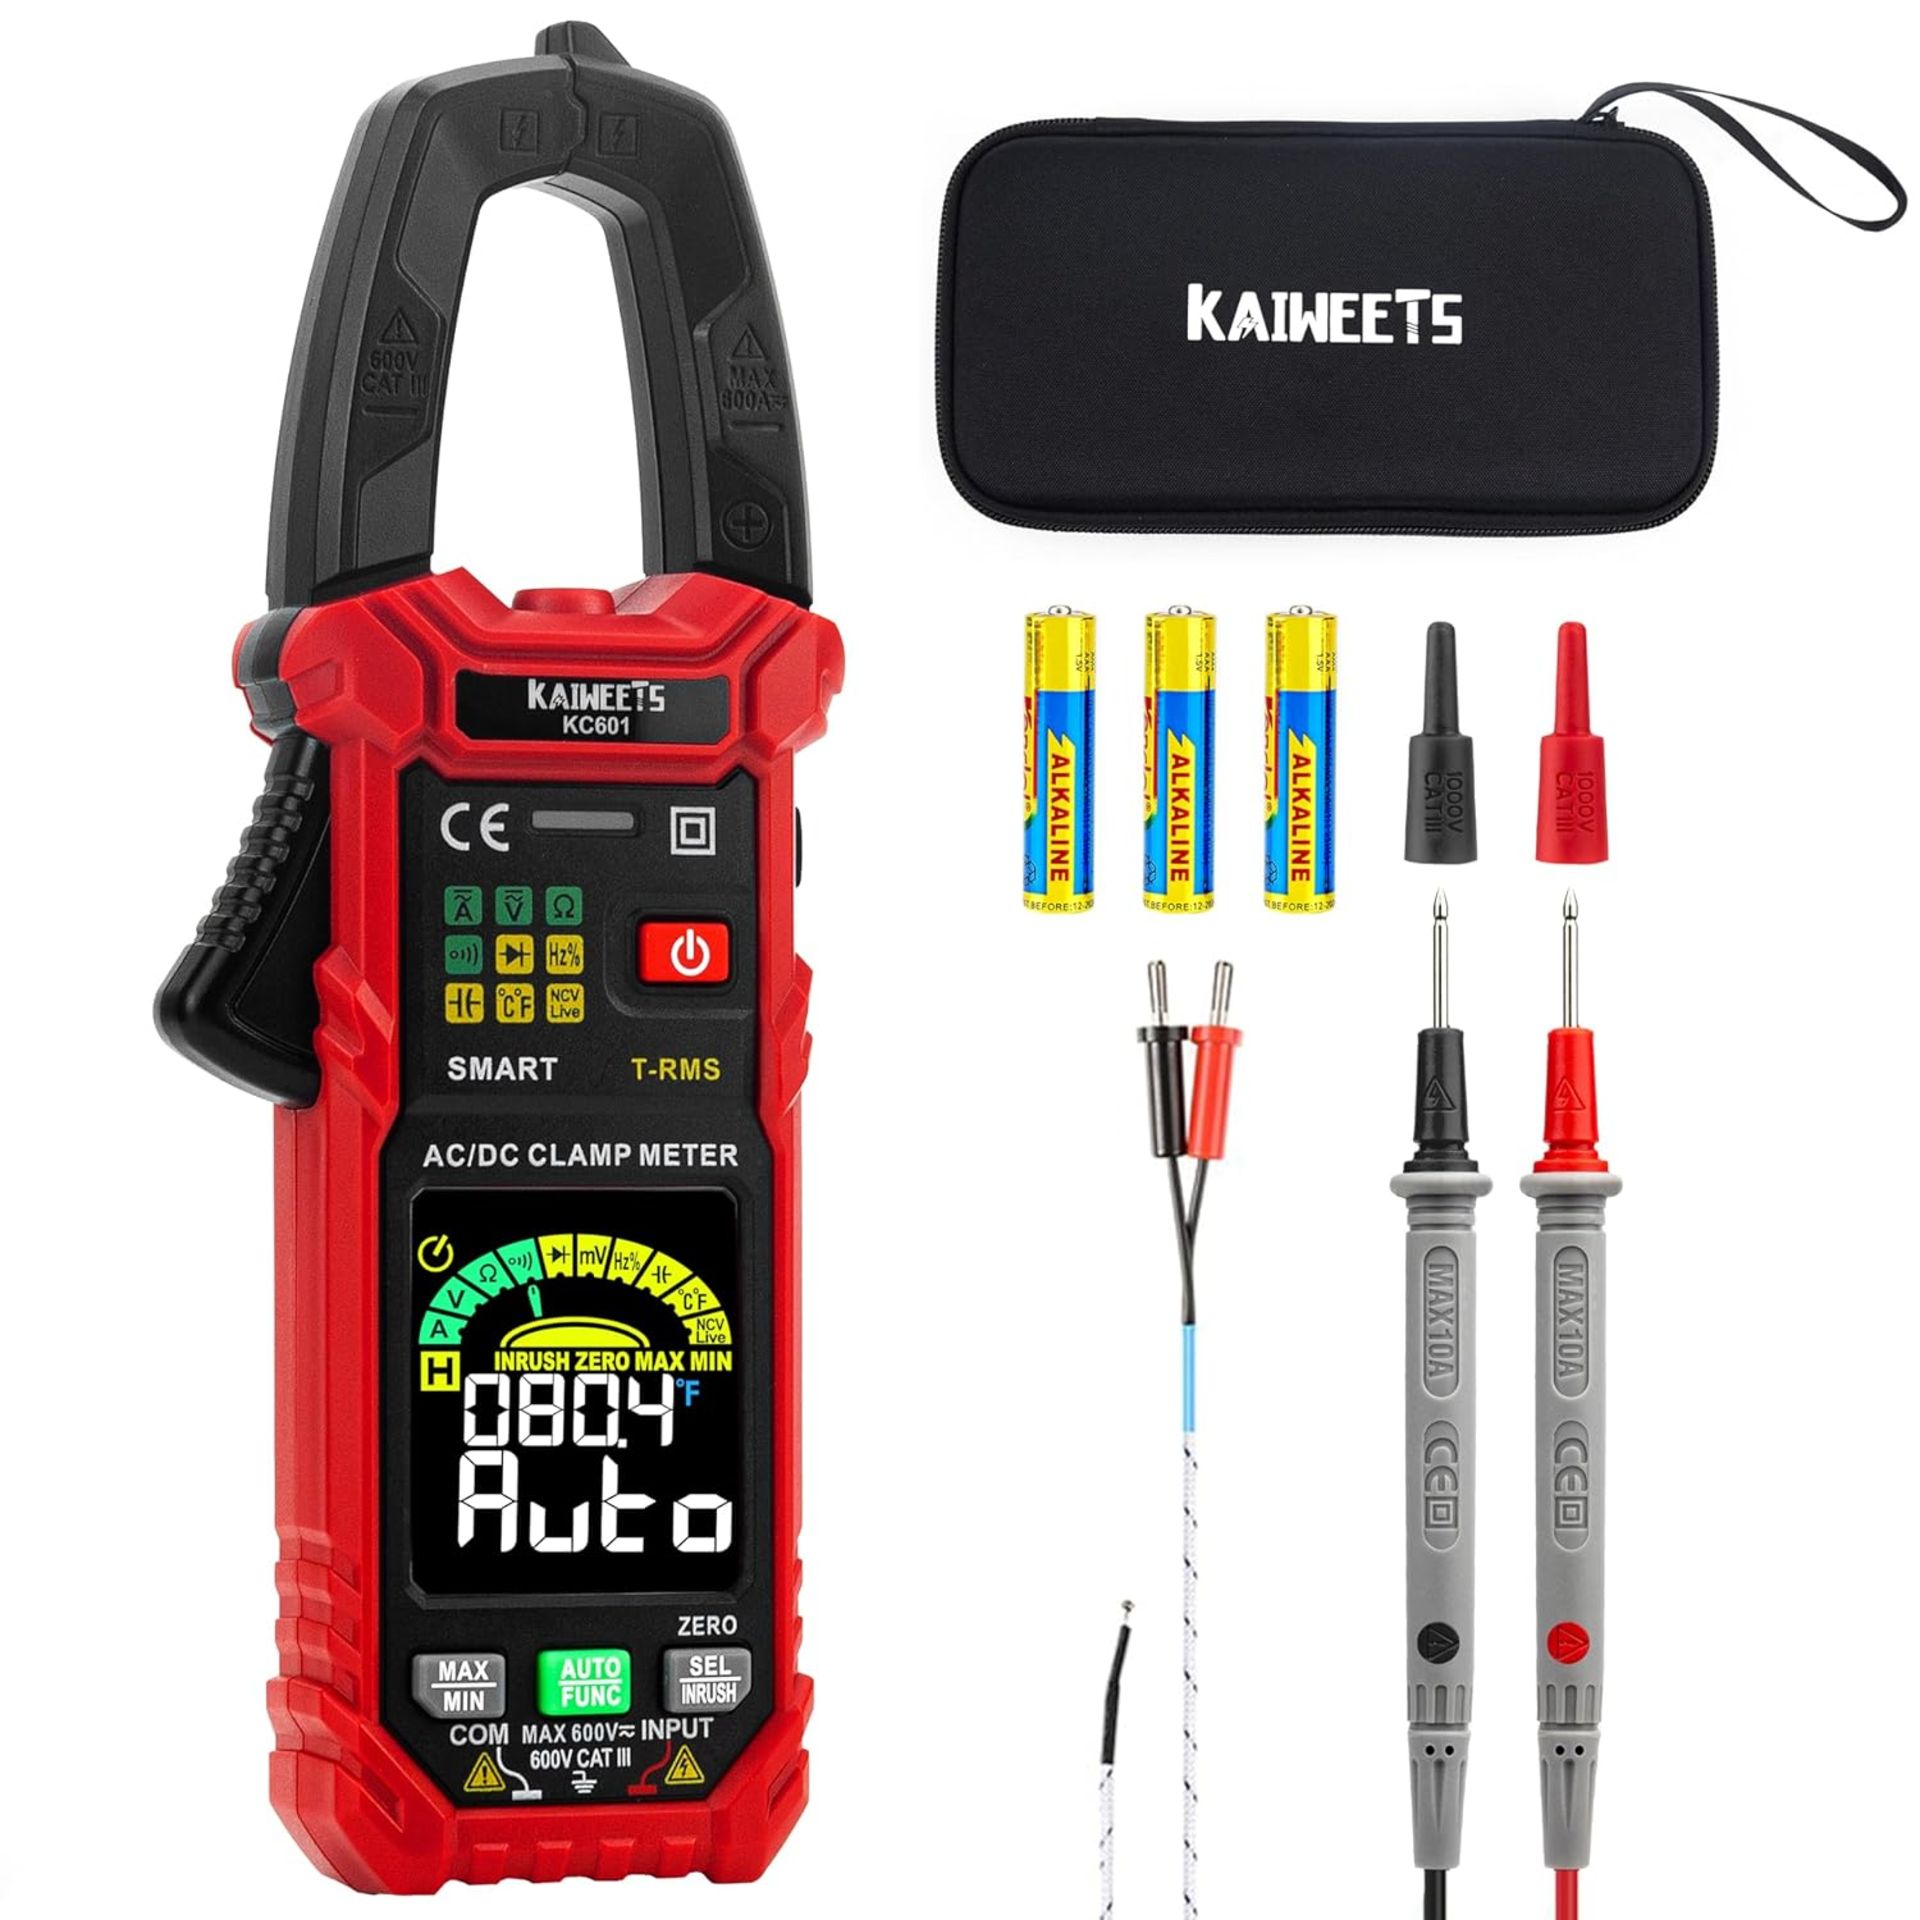 RRP £45.99 KAIWEETS Smart Digital Clamp Meter T-RMS 6000 Counts, Clamp Multimeter with Inrush